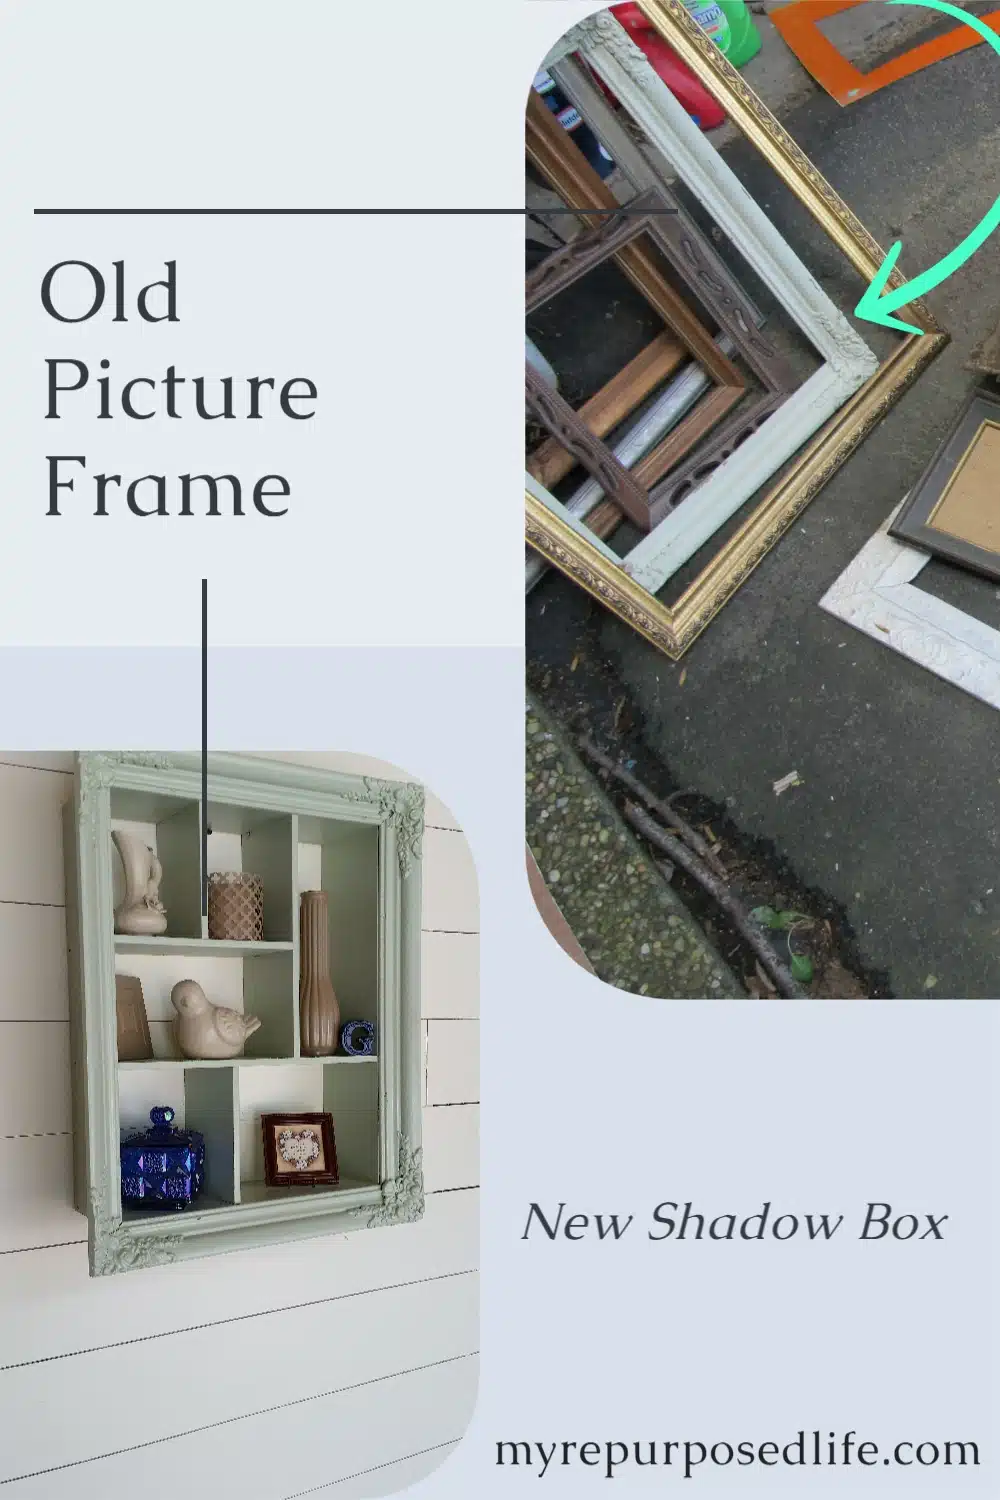 How to use an ornate picture frame and drawer pieces to make a divided shadow box that can be hung on the wall four different ways. Step by step directions to help you do it yourself. Adding spray painted thrift store decor items makes this a fun and frugal project. #MyRepurposedLife #thrift #pictureframe #repurposed #shadowbox via @repurposedlife